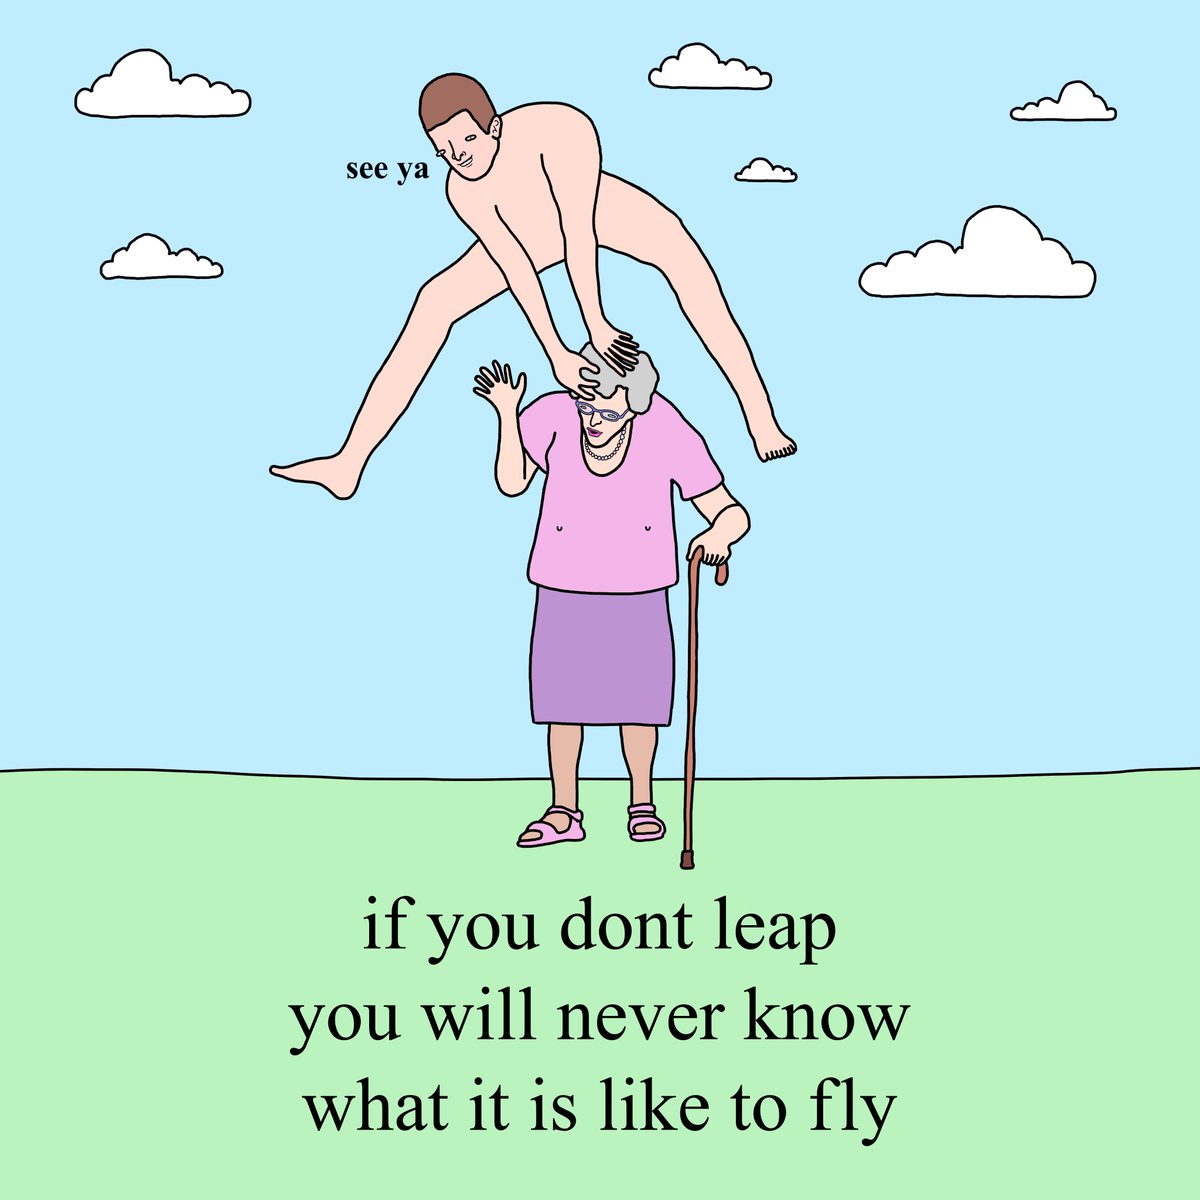 happy leap year day to everyone who celebrates it xox